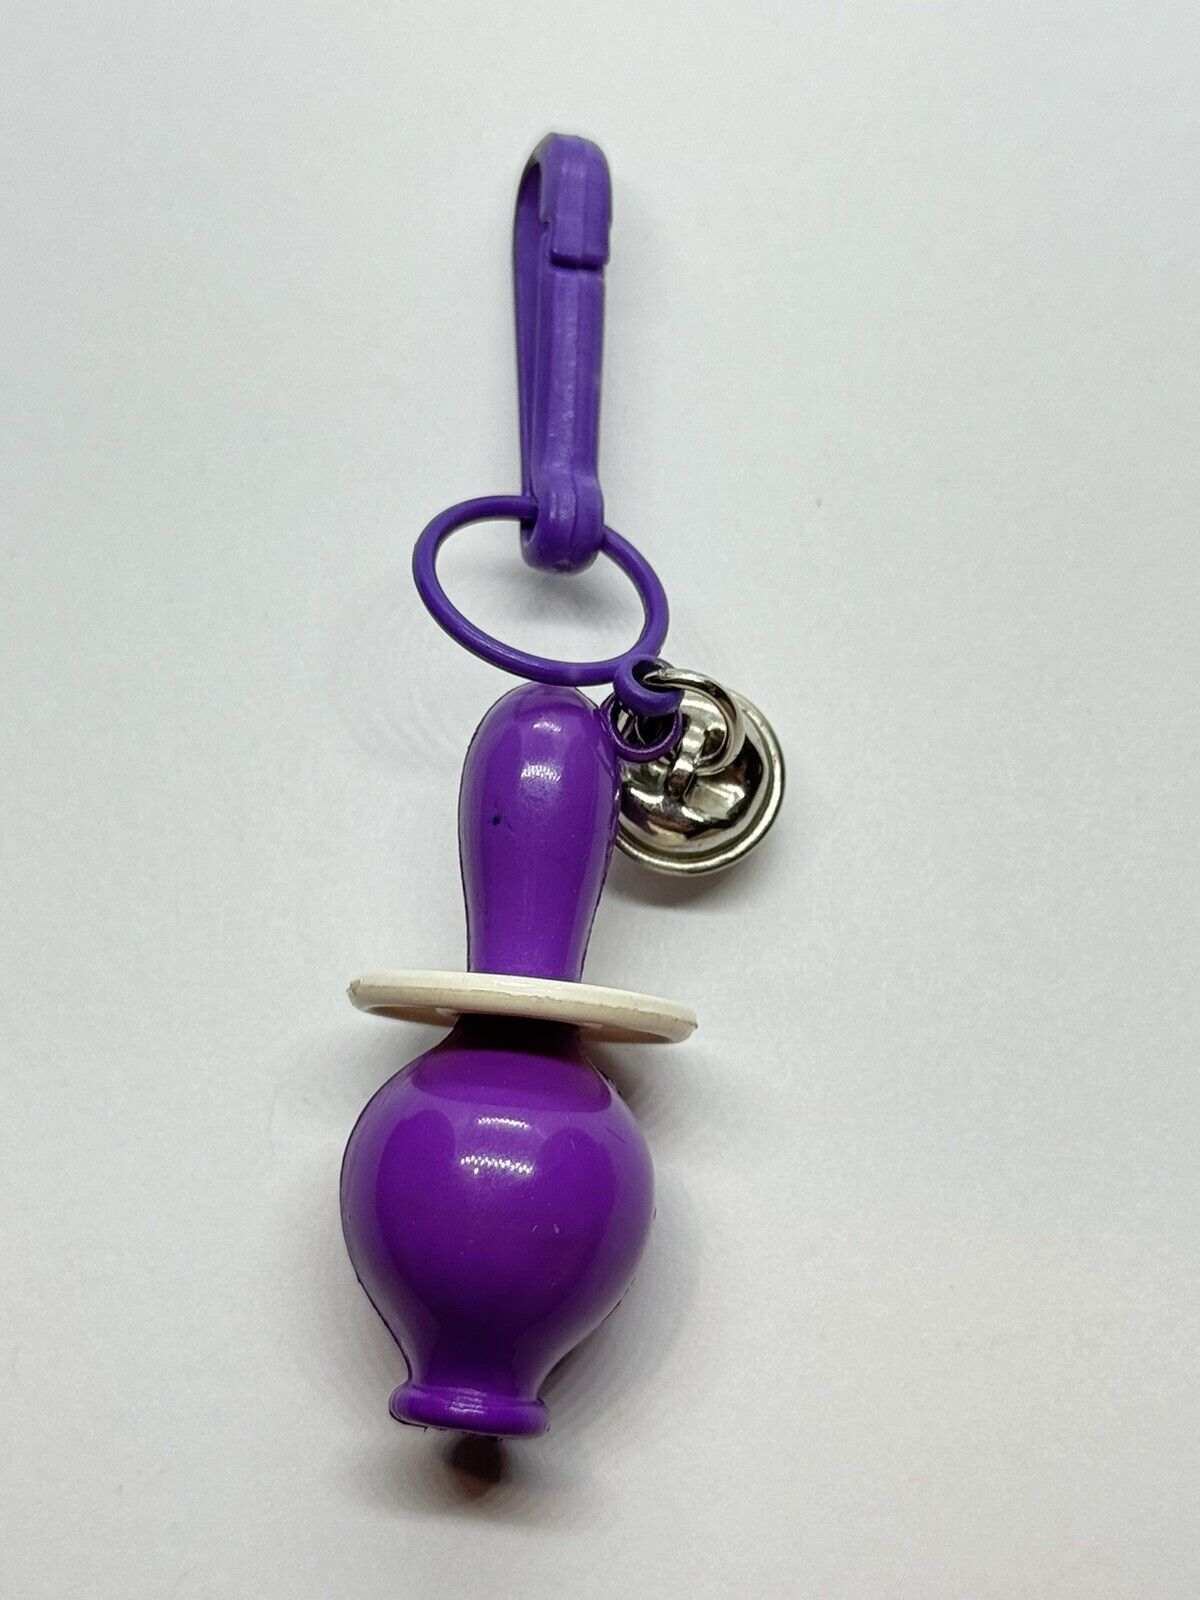 Vintage 1980s Plastic Bell Charm Bowling Pin For 80s Charm Necklace purple